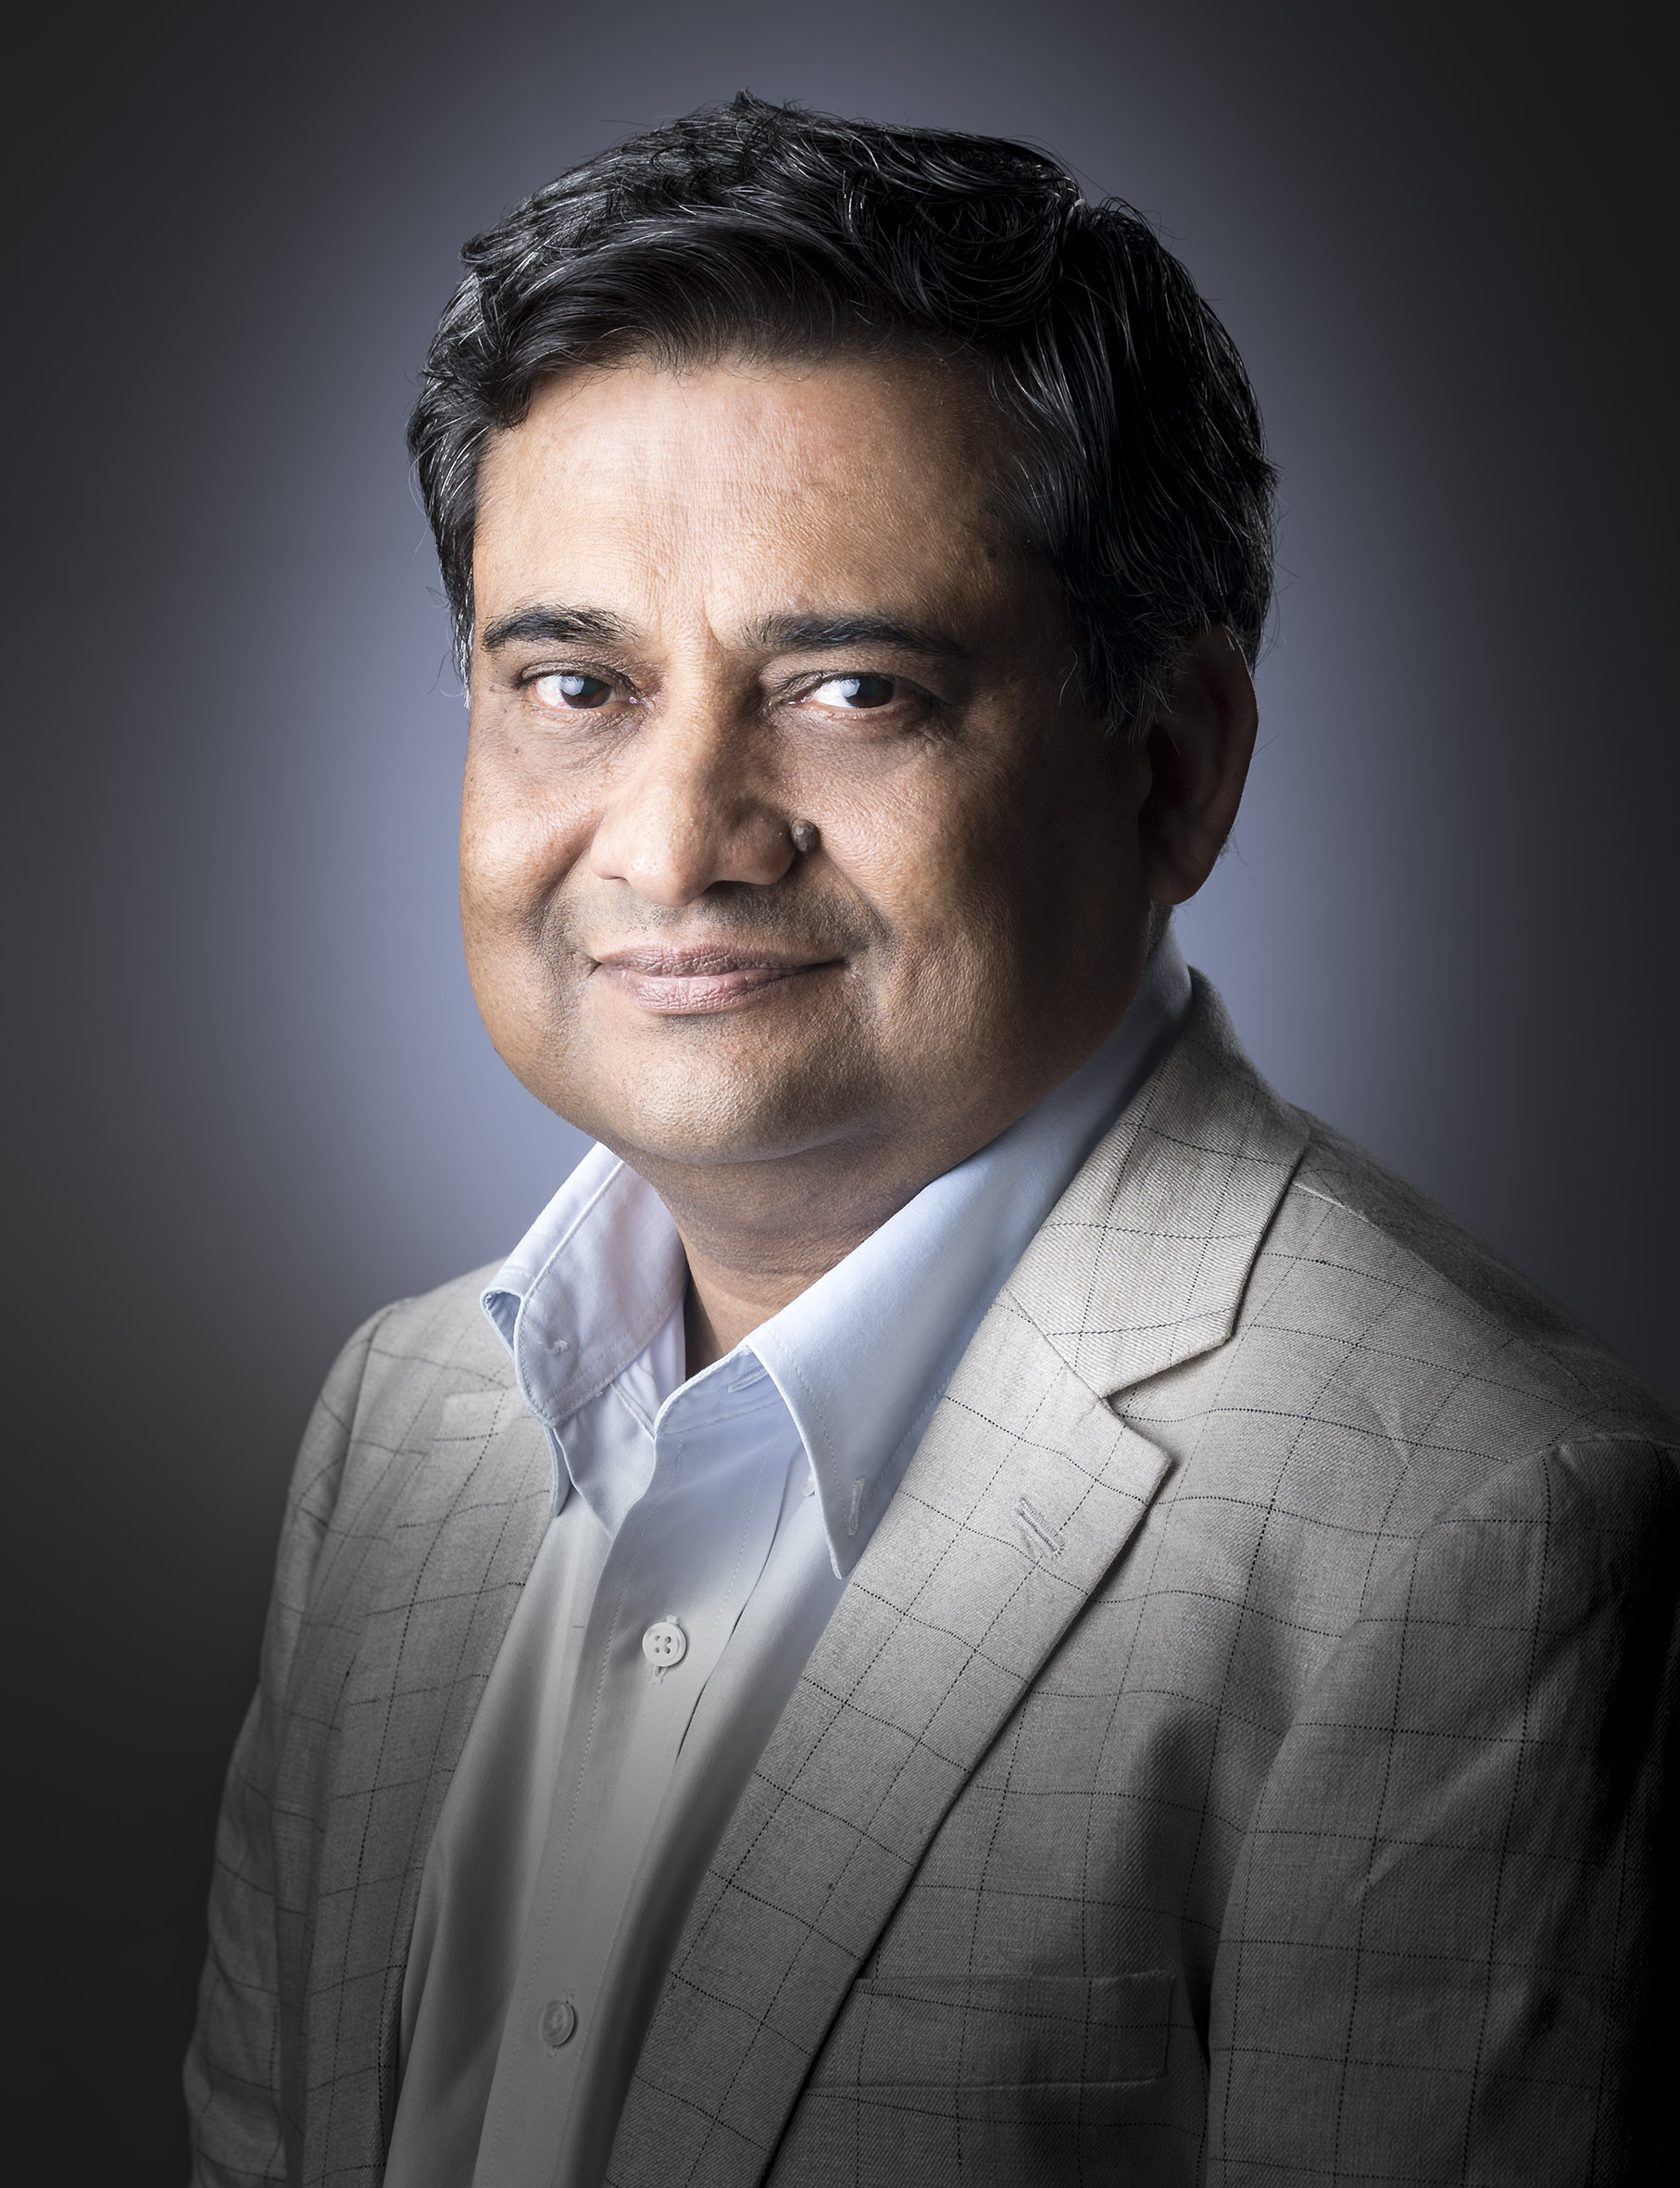 Kaizzen Launches “Kaizzen Insights” a research and knowledge based vertical -Appoints Ashish Gupta as Director, Kaizzen Insights